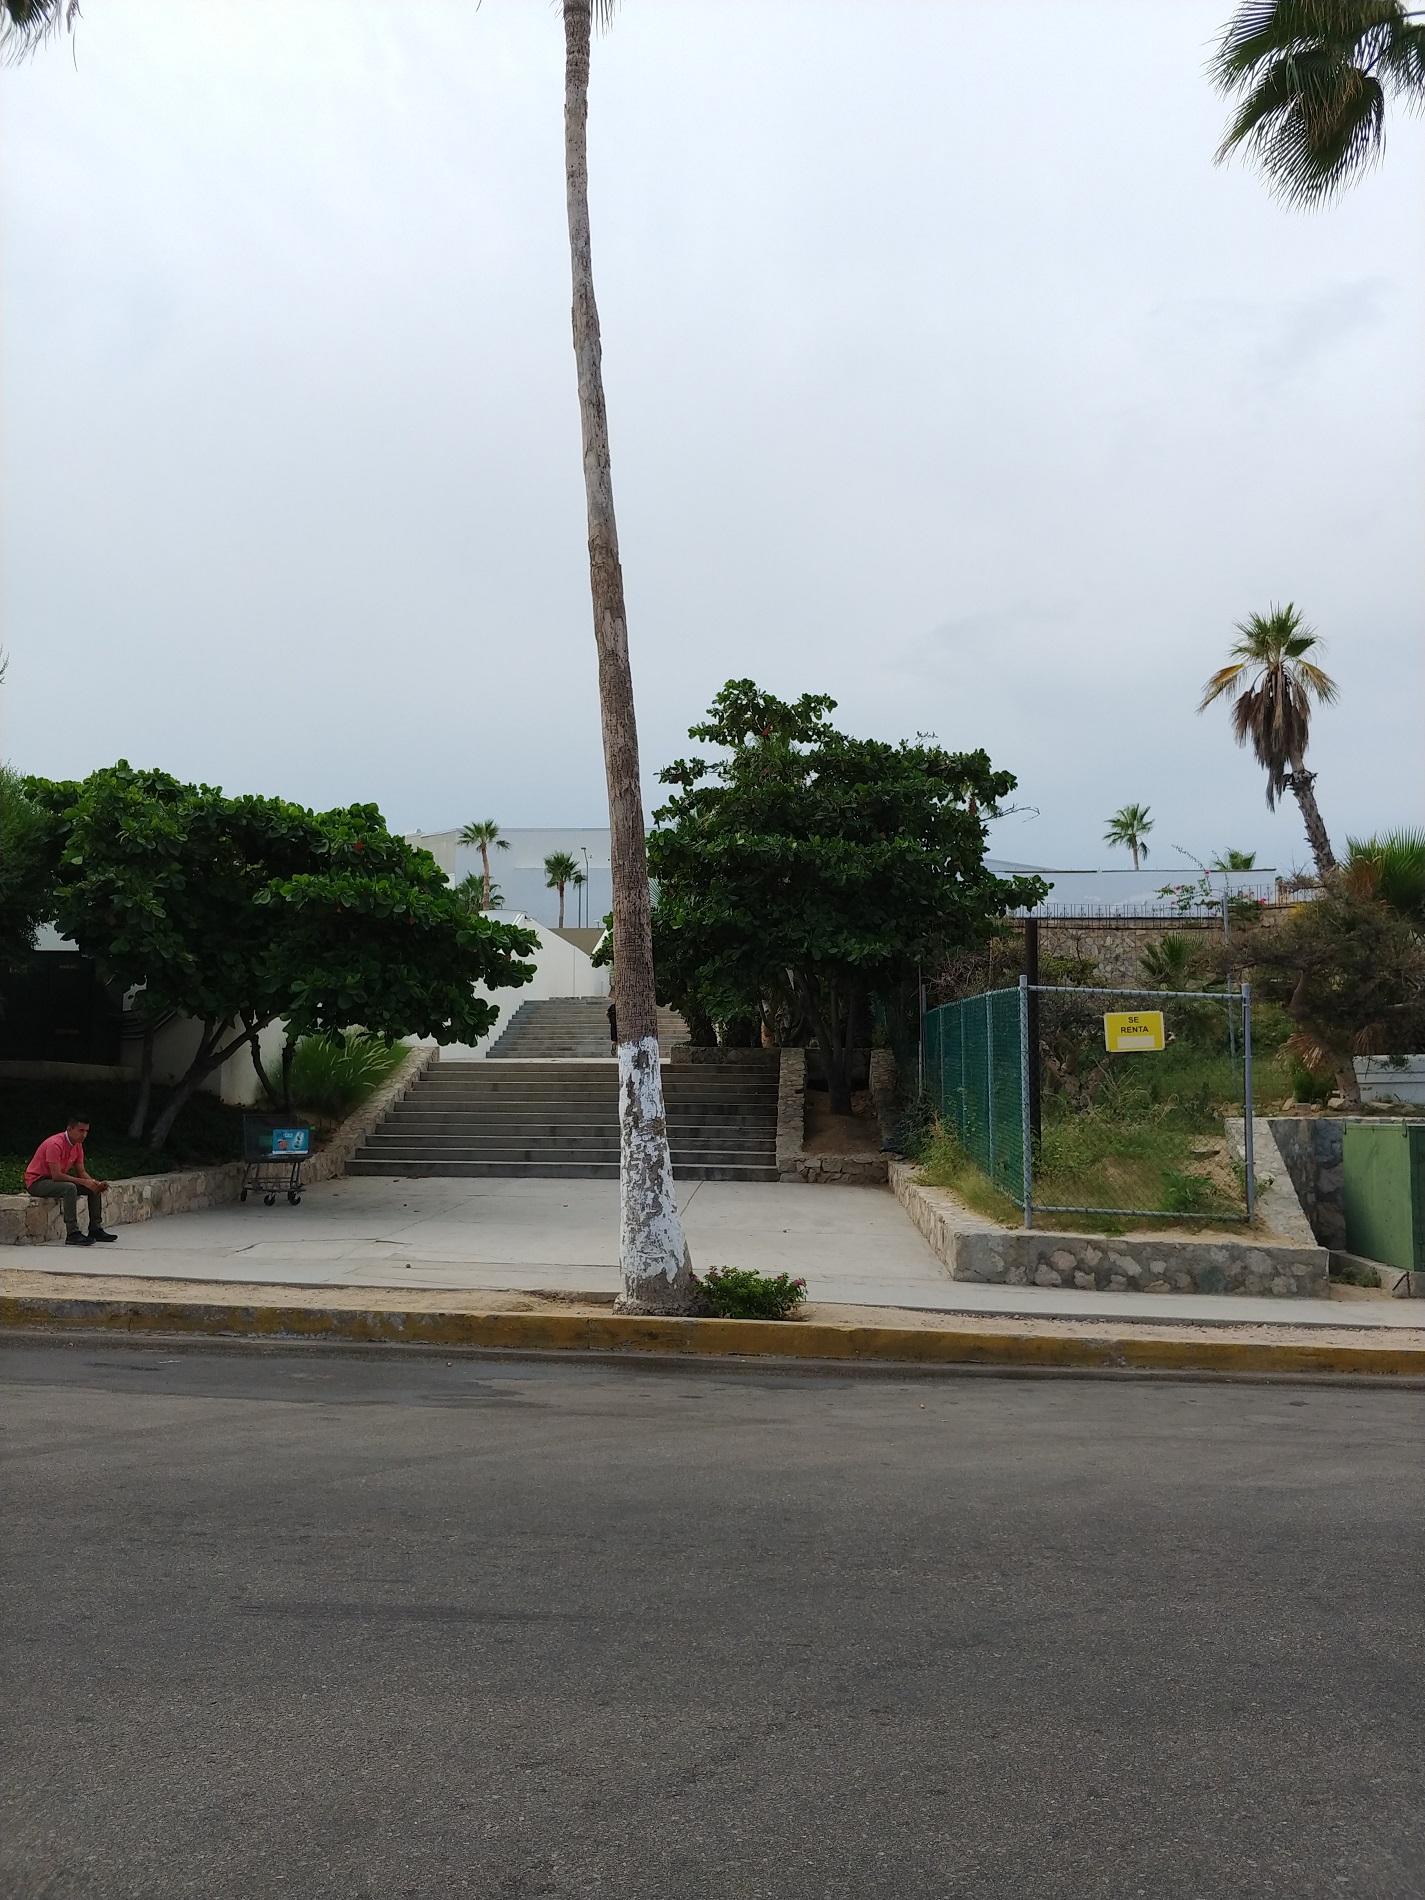 a person sitting on a bench next to a concrete staircase